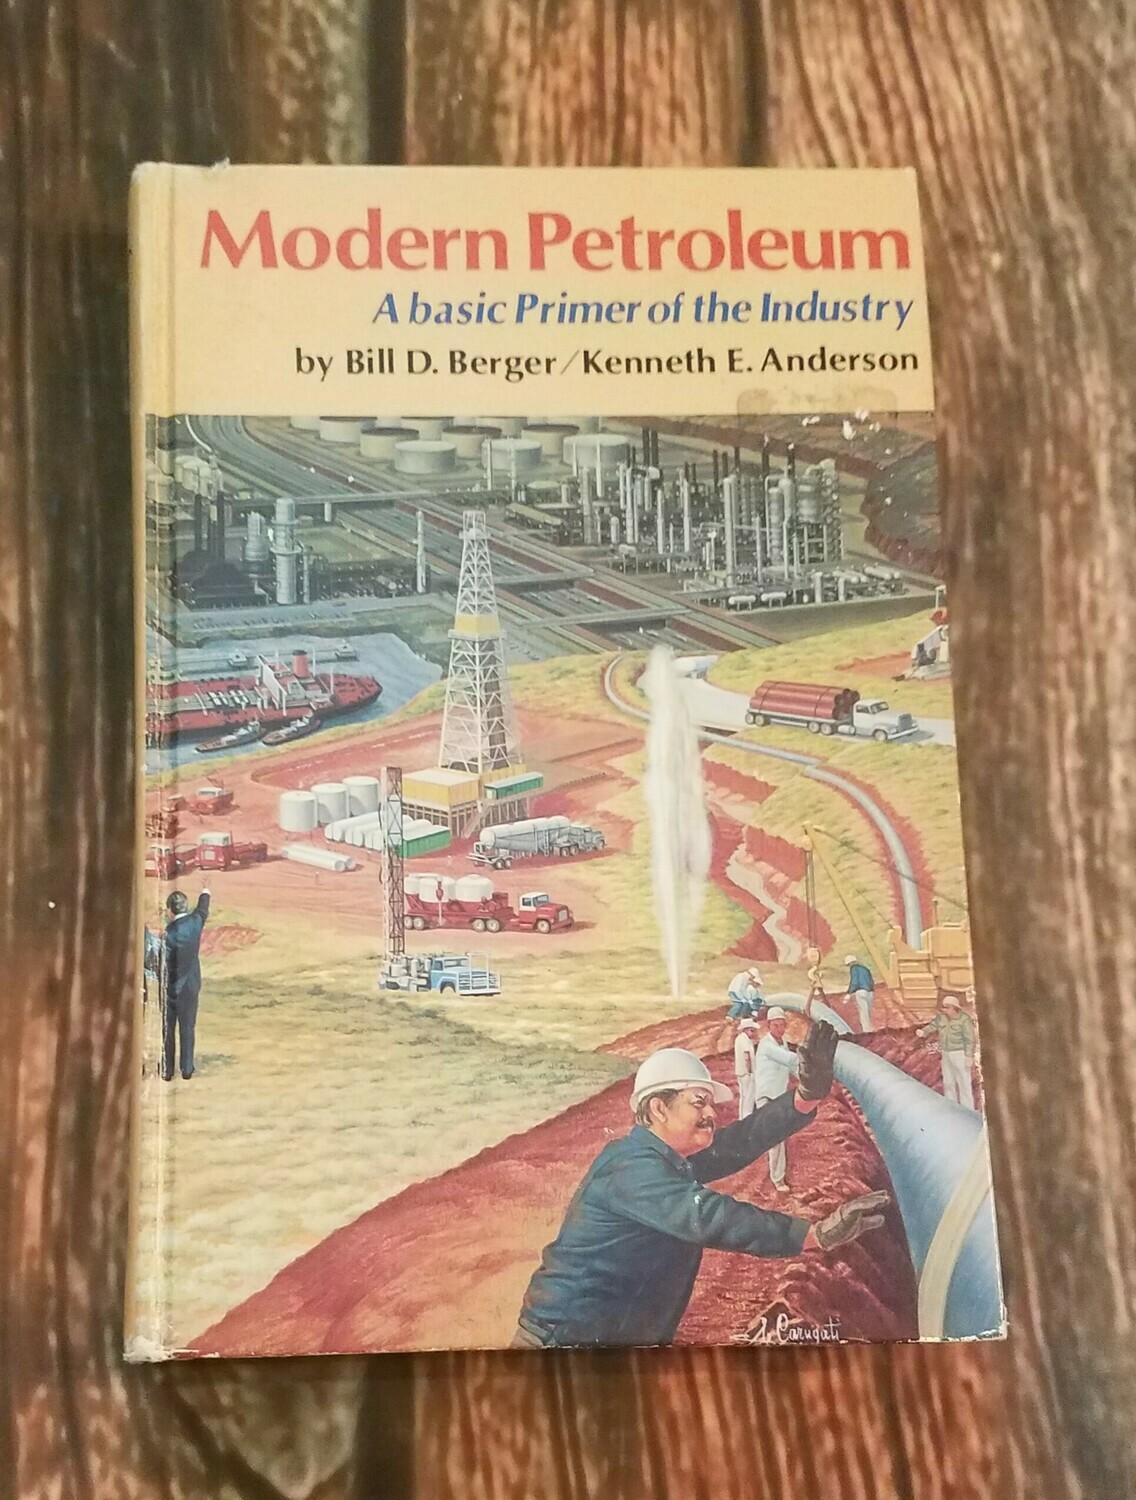 Modern Petroleum by Bill D. Berger and Kenneth E. Anderson